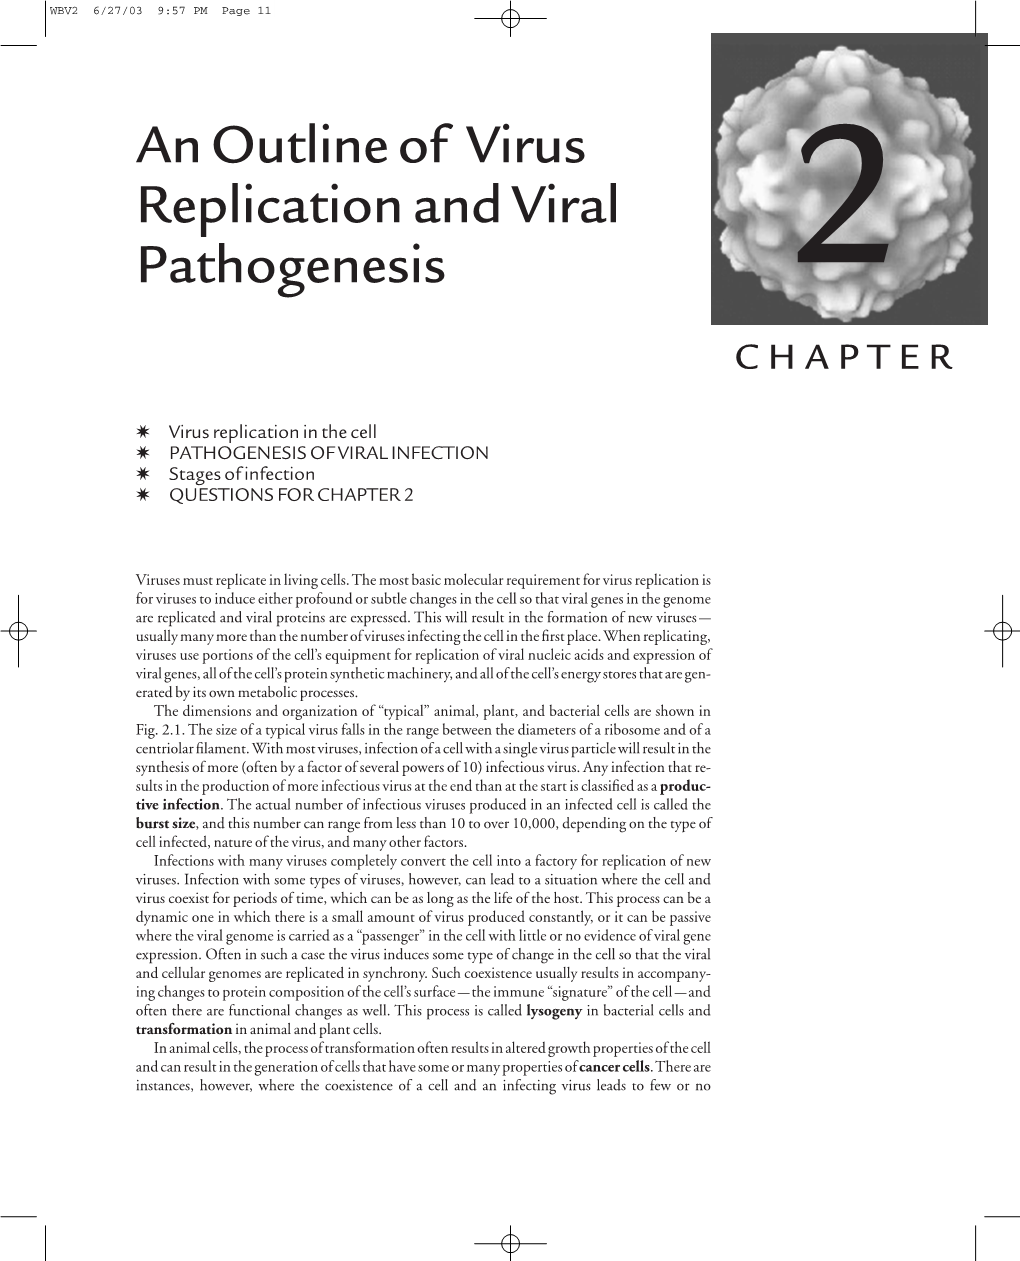 An Outline of Virus Replication and Viral Pathogenesis 2 CHAPTER